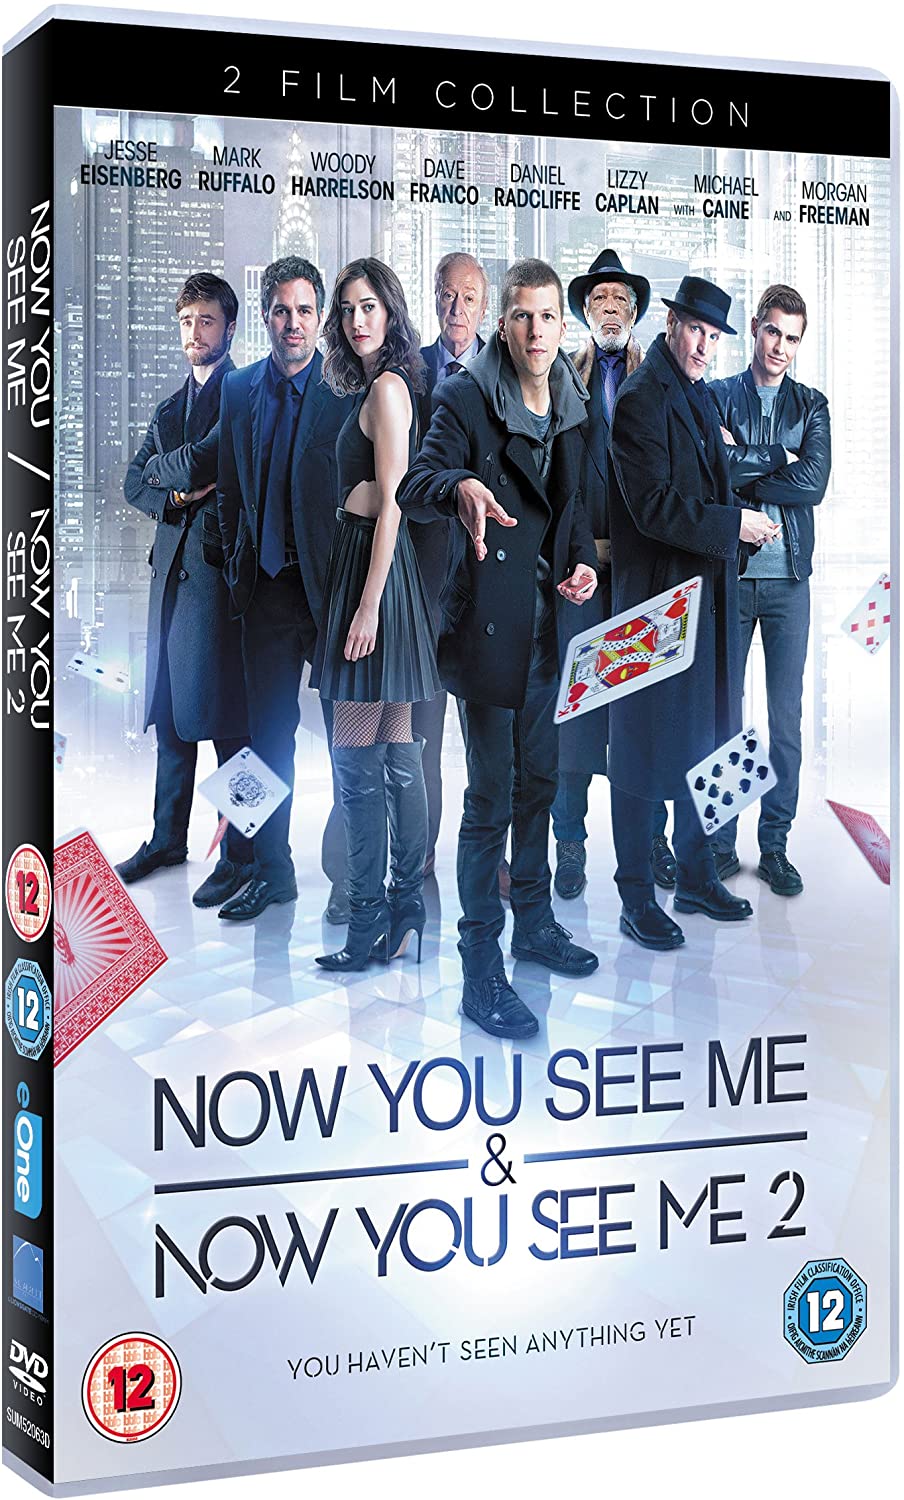 Now You See Me 2 Film Collection (DVD)